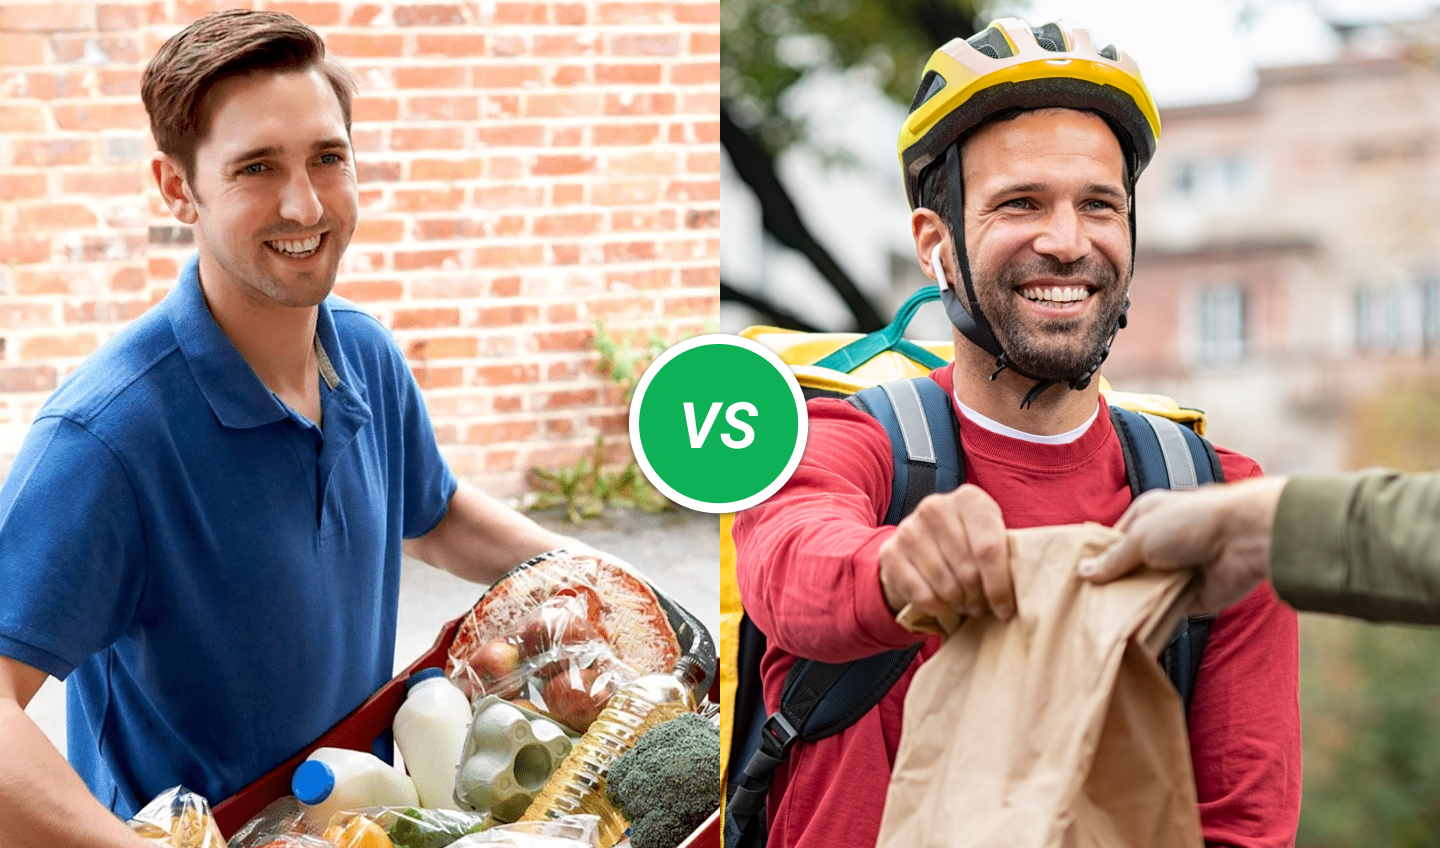 Grocery Shopper vs Food Delivery Driver